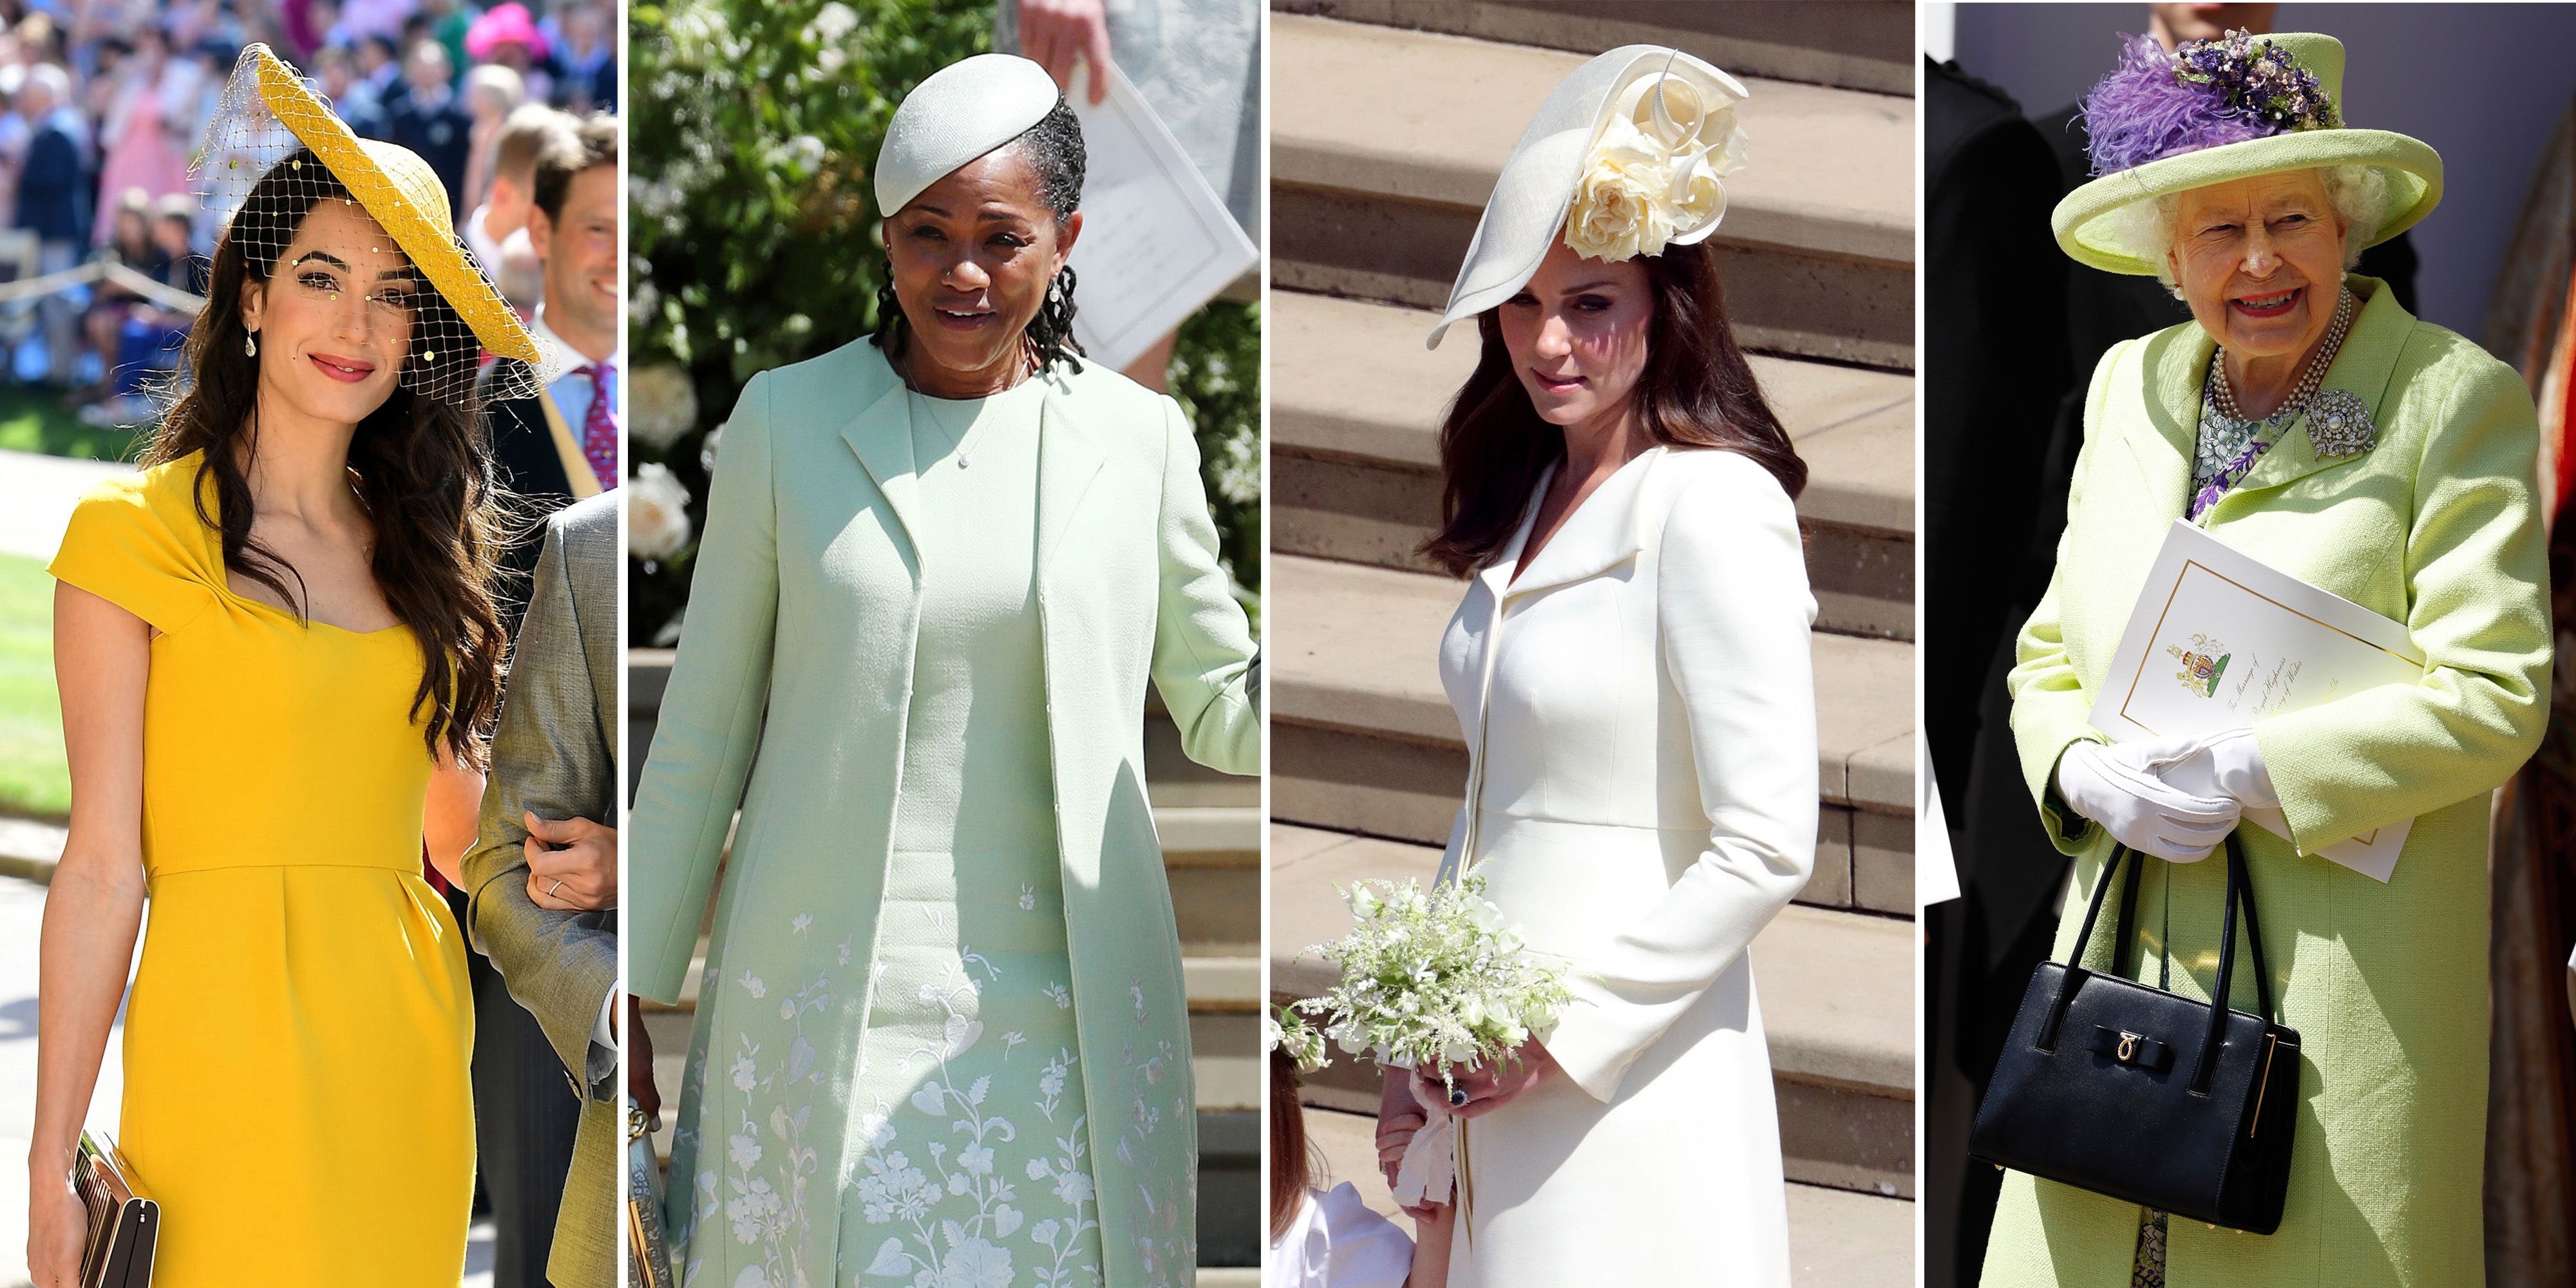 Royal wedding guest trend - guests in yellow and green